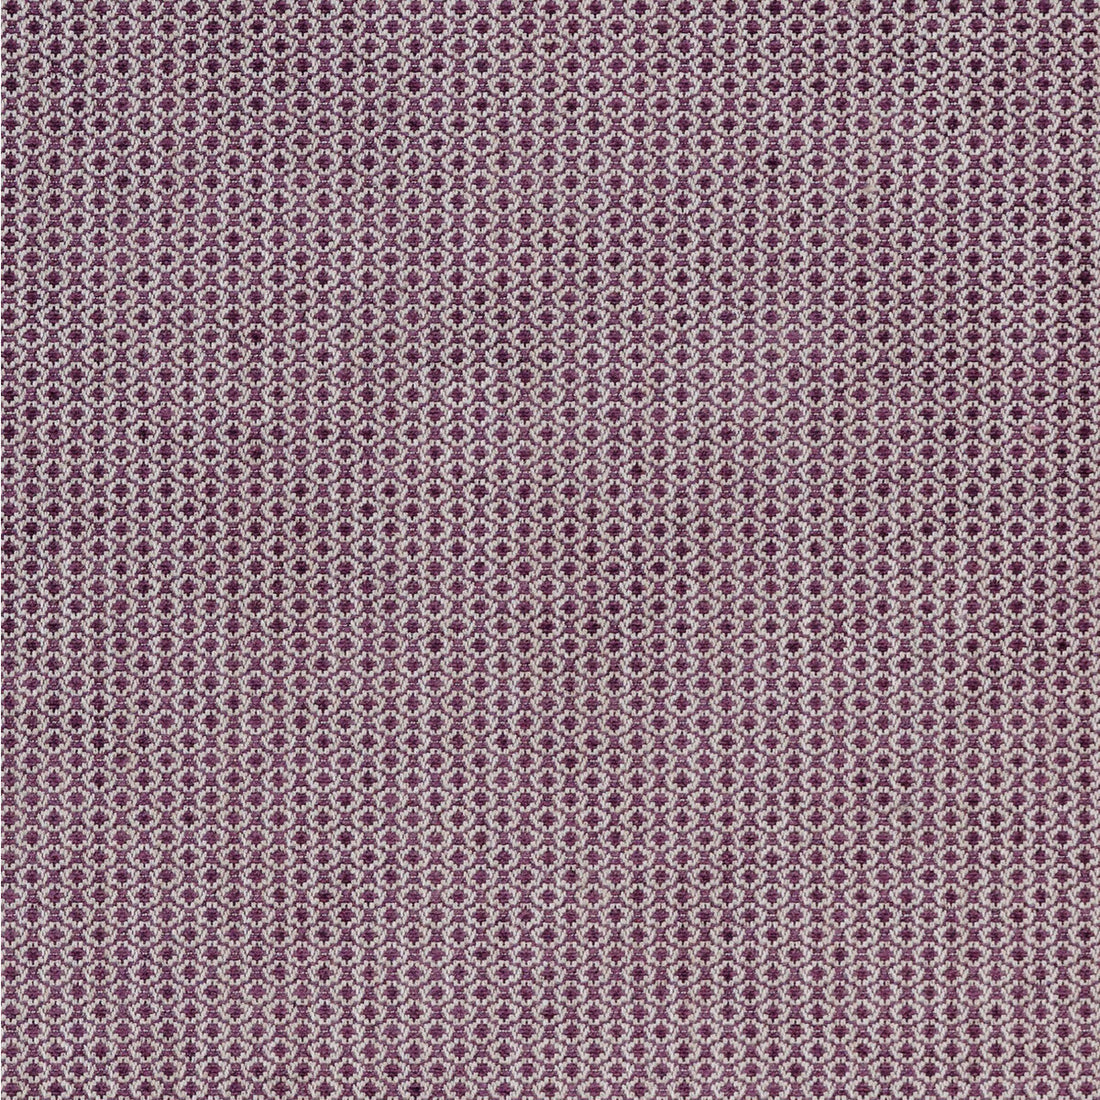 Cosgrove fabric in aubergine color - pattern BFC-3672.909.0 - by Lee Jofa in the Blithfield collection